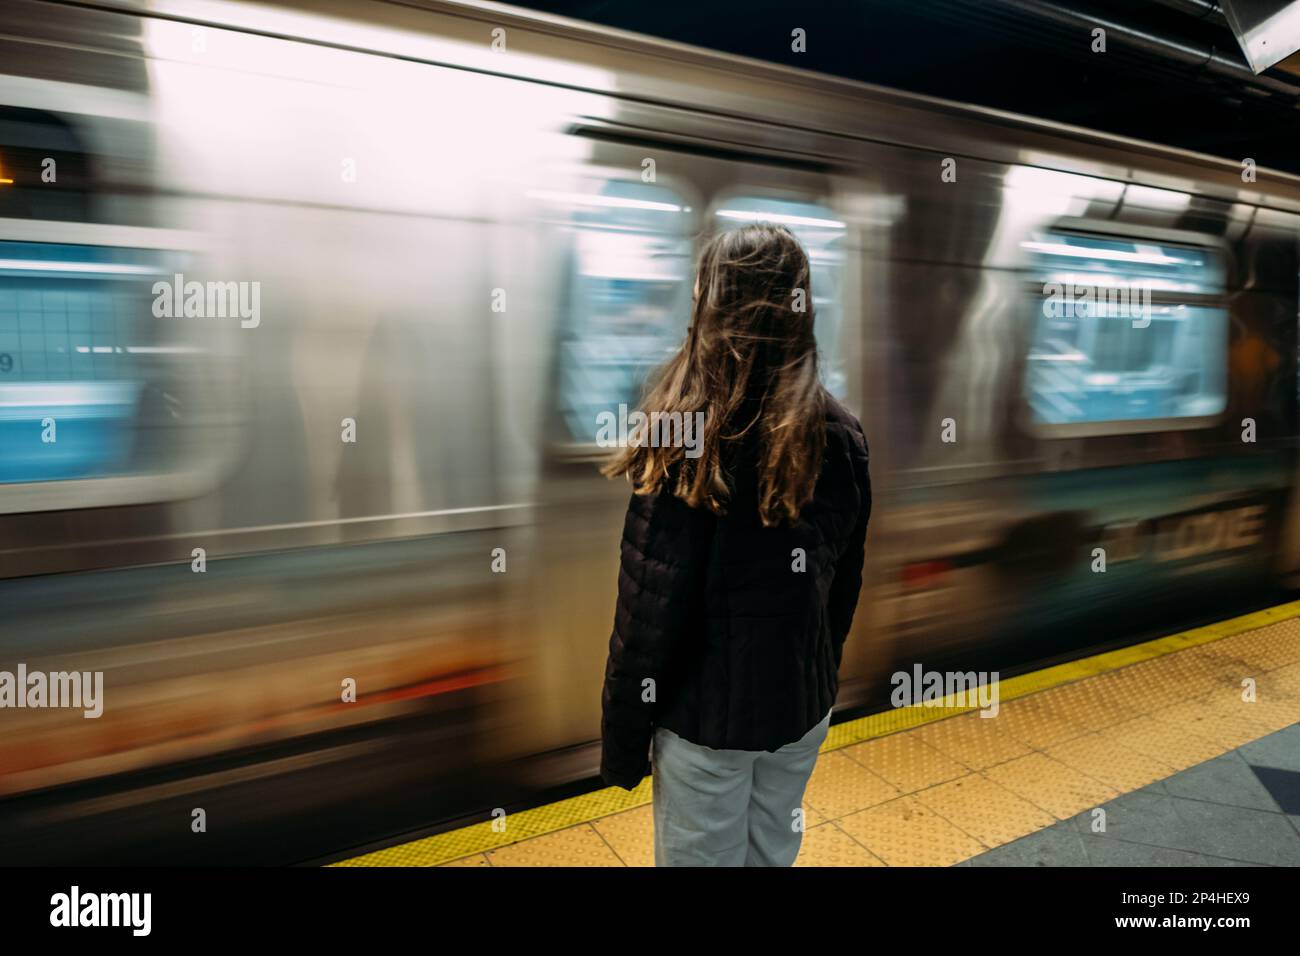 Teen girl standing in front of moving subway train Stock Photo